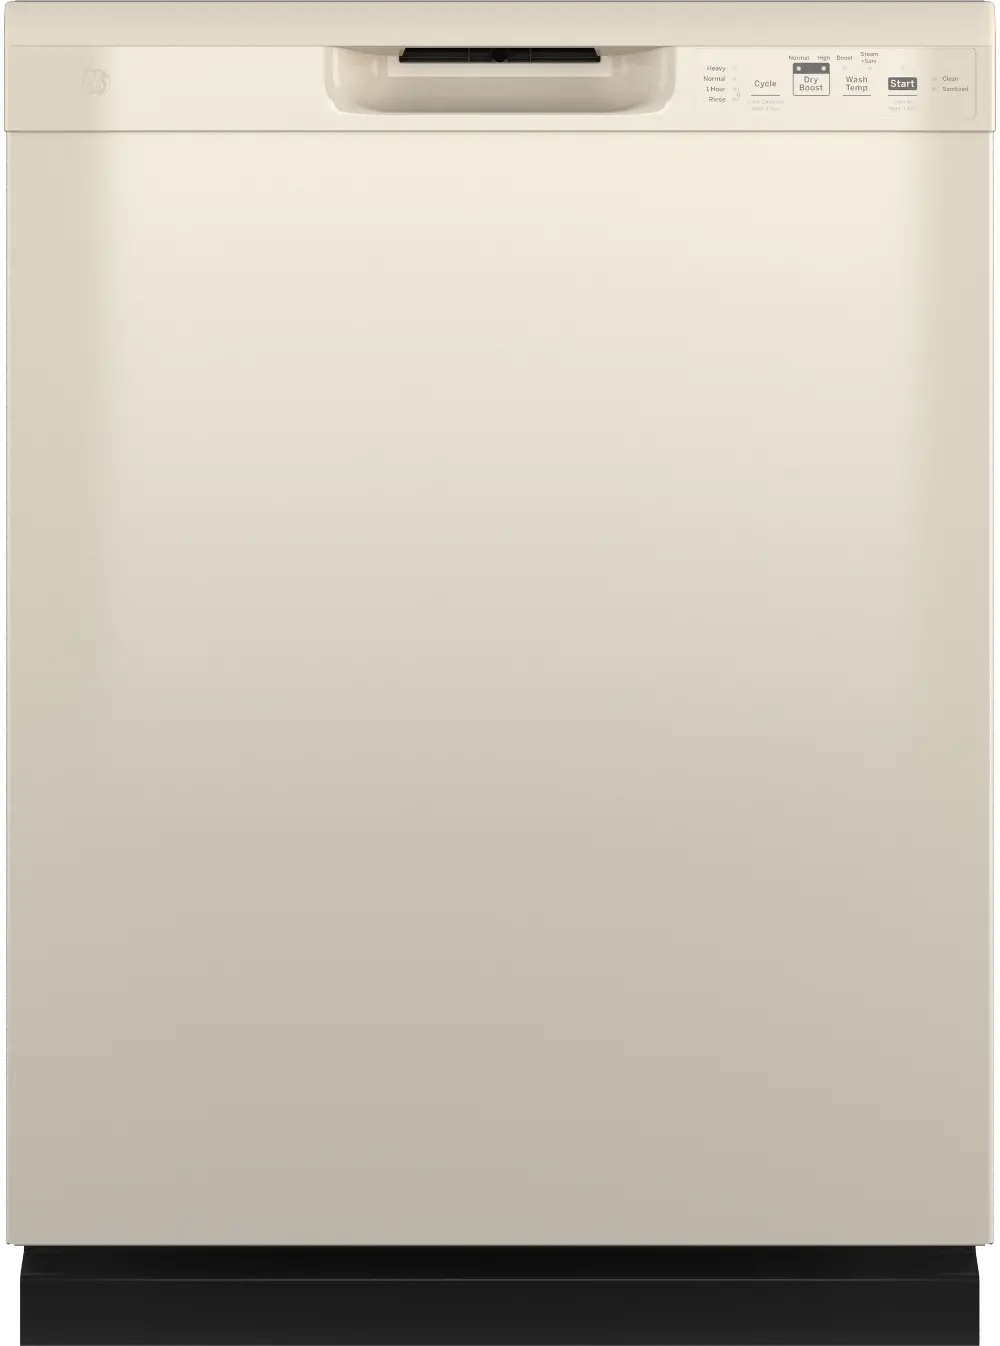 GDF535PGRCC GE Front Control Dishwasher - Biscuit Tan-1